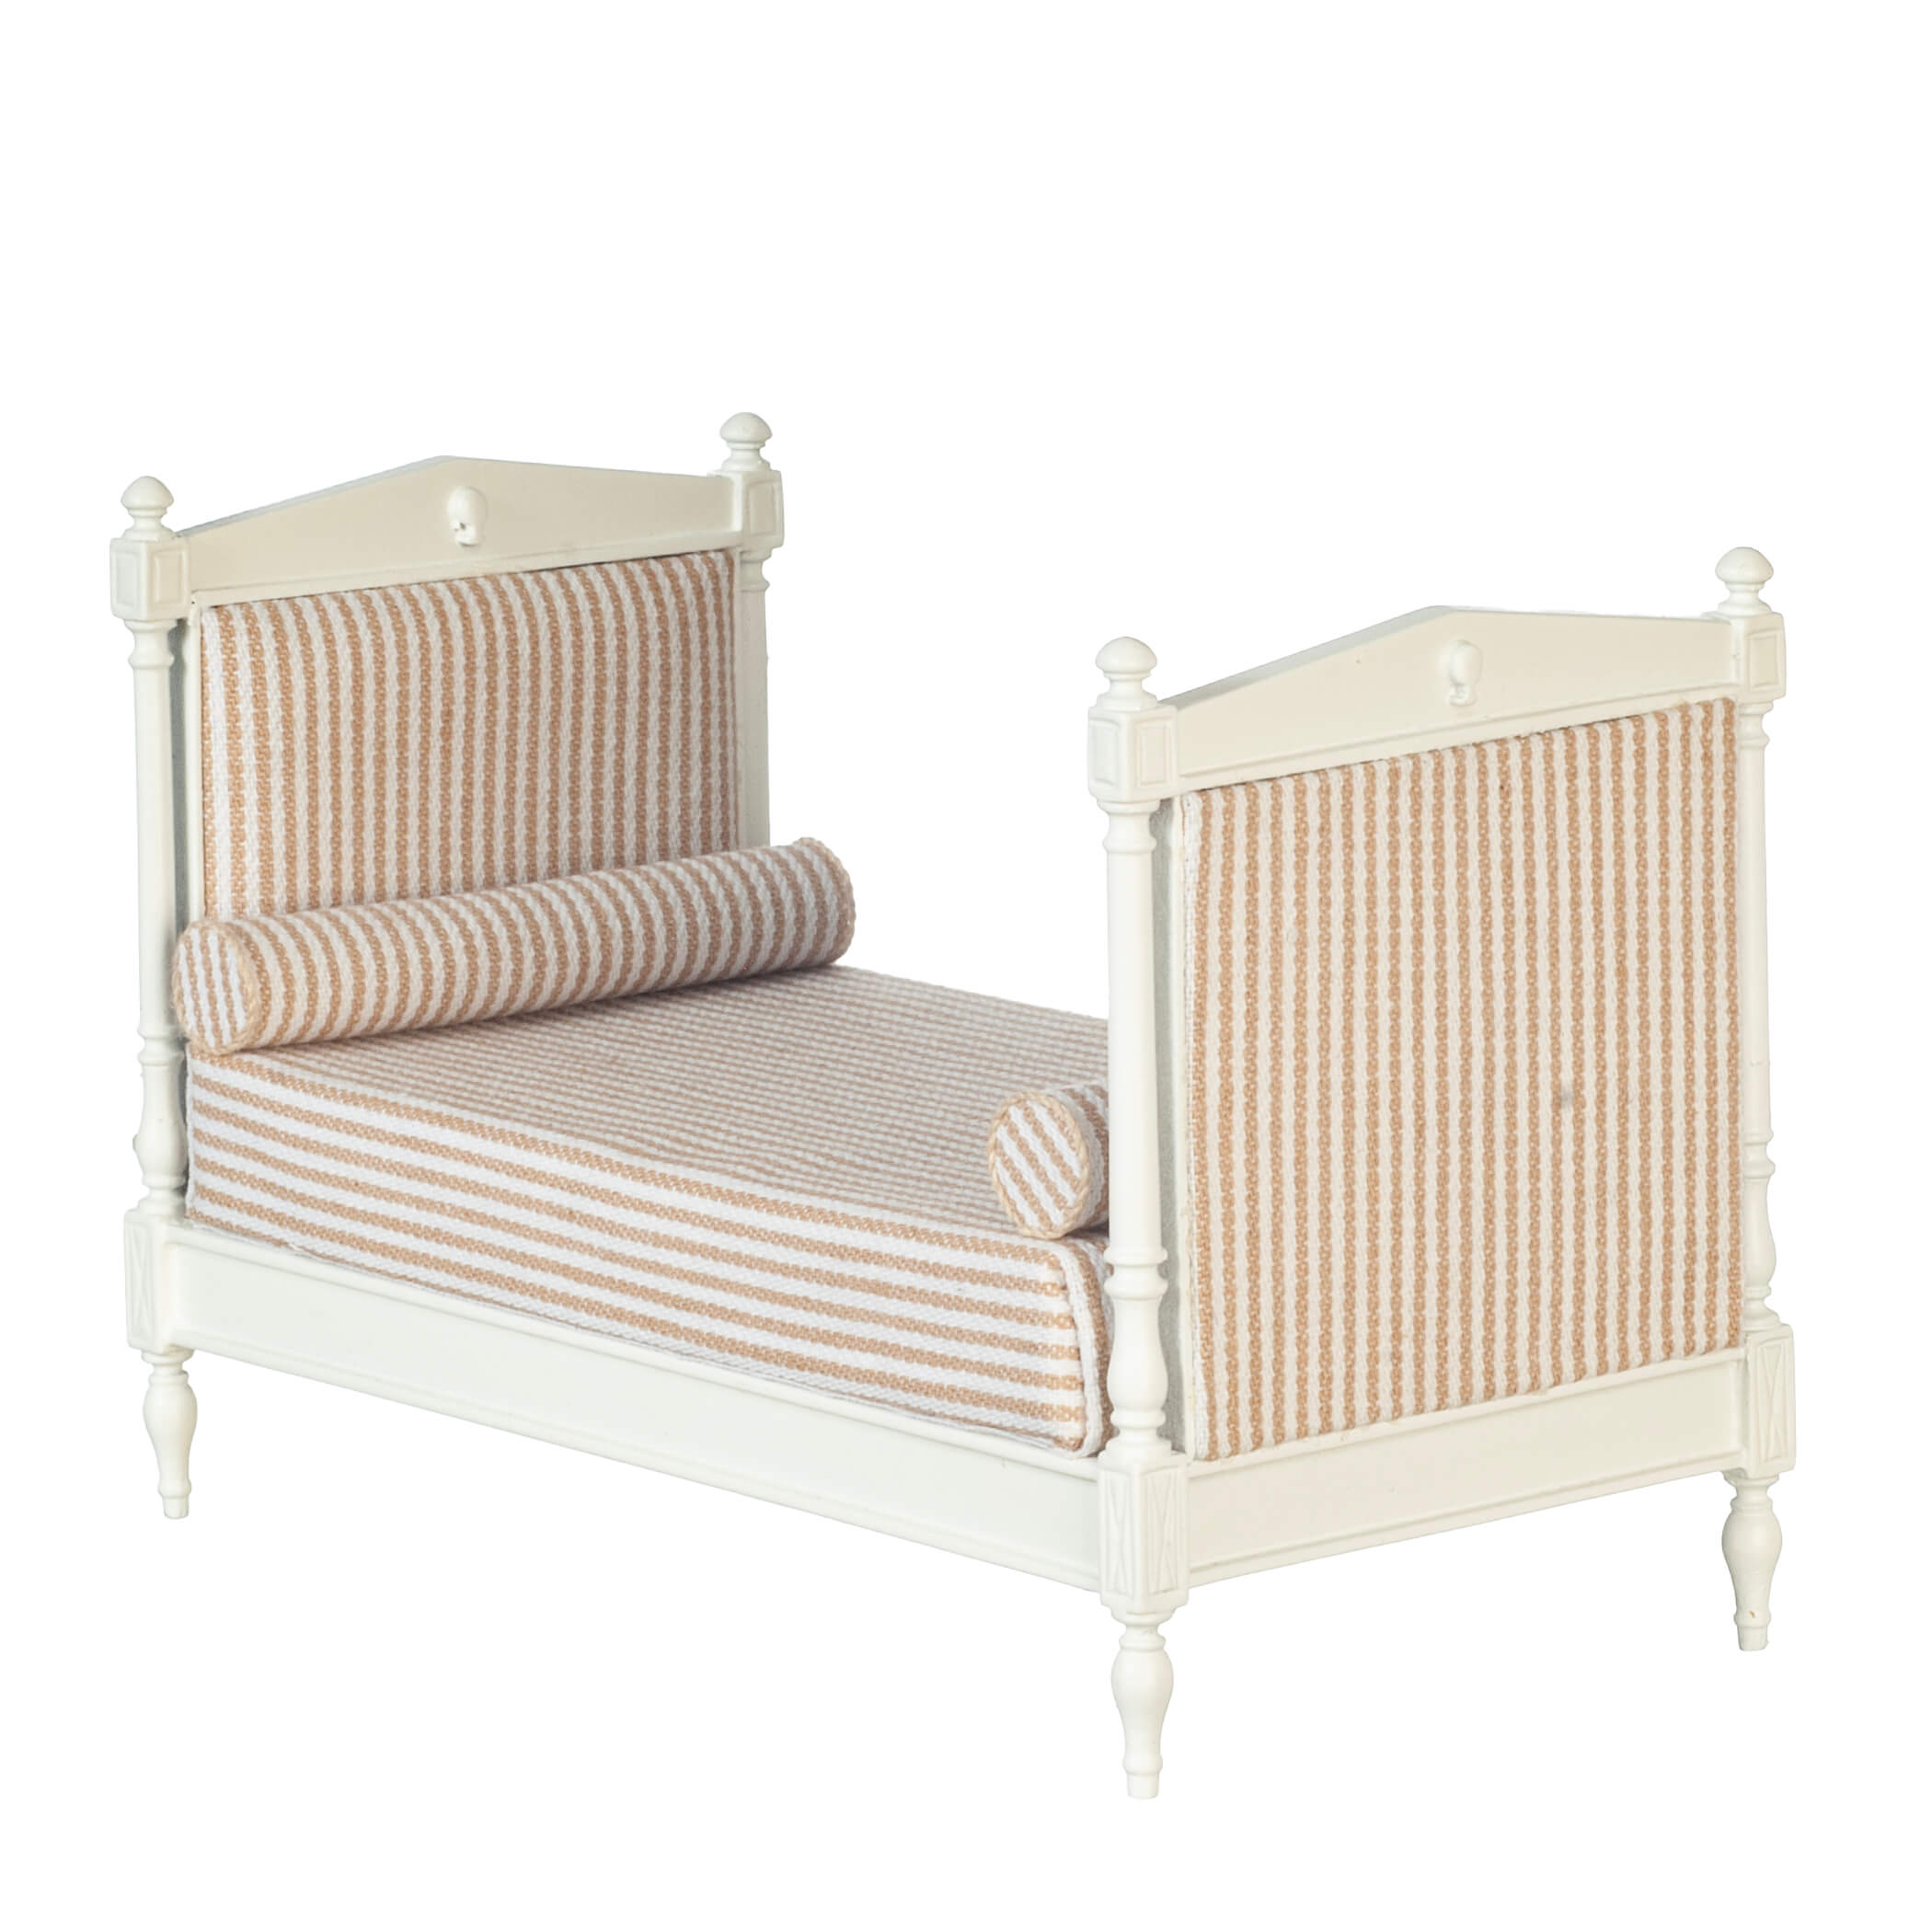 Double Ended Daybed - White